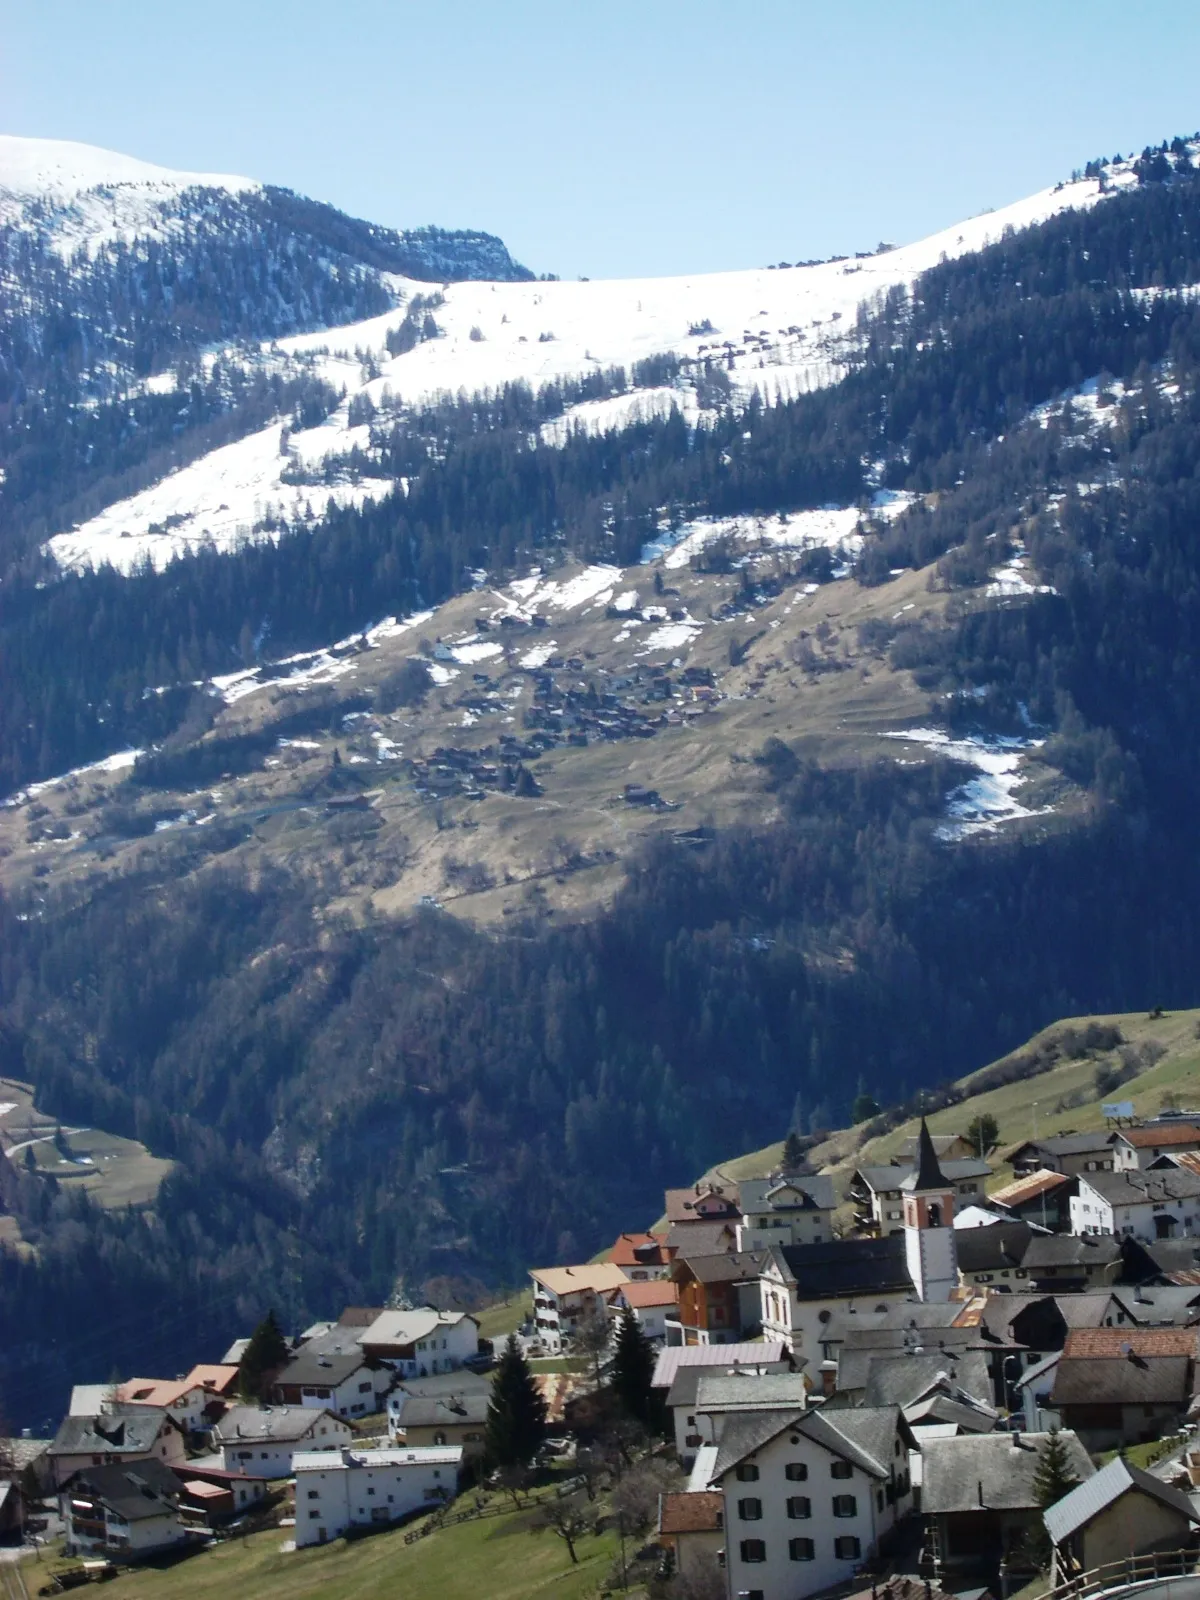 Photo showing: Lain GR, Switzerland, with Mutten on the background

self-made, March 2007